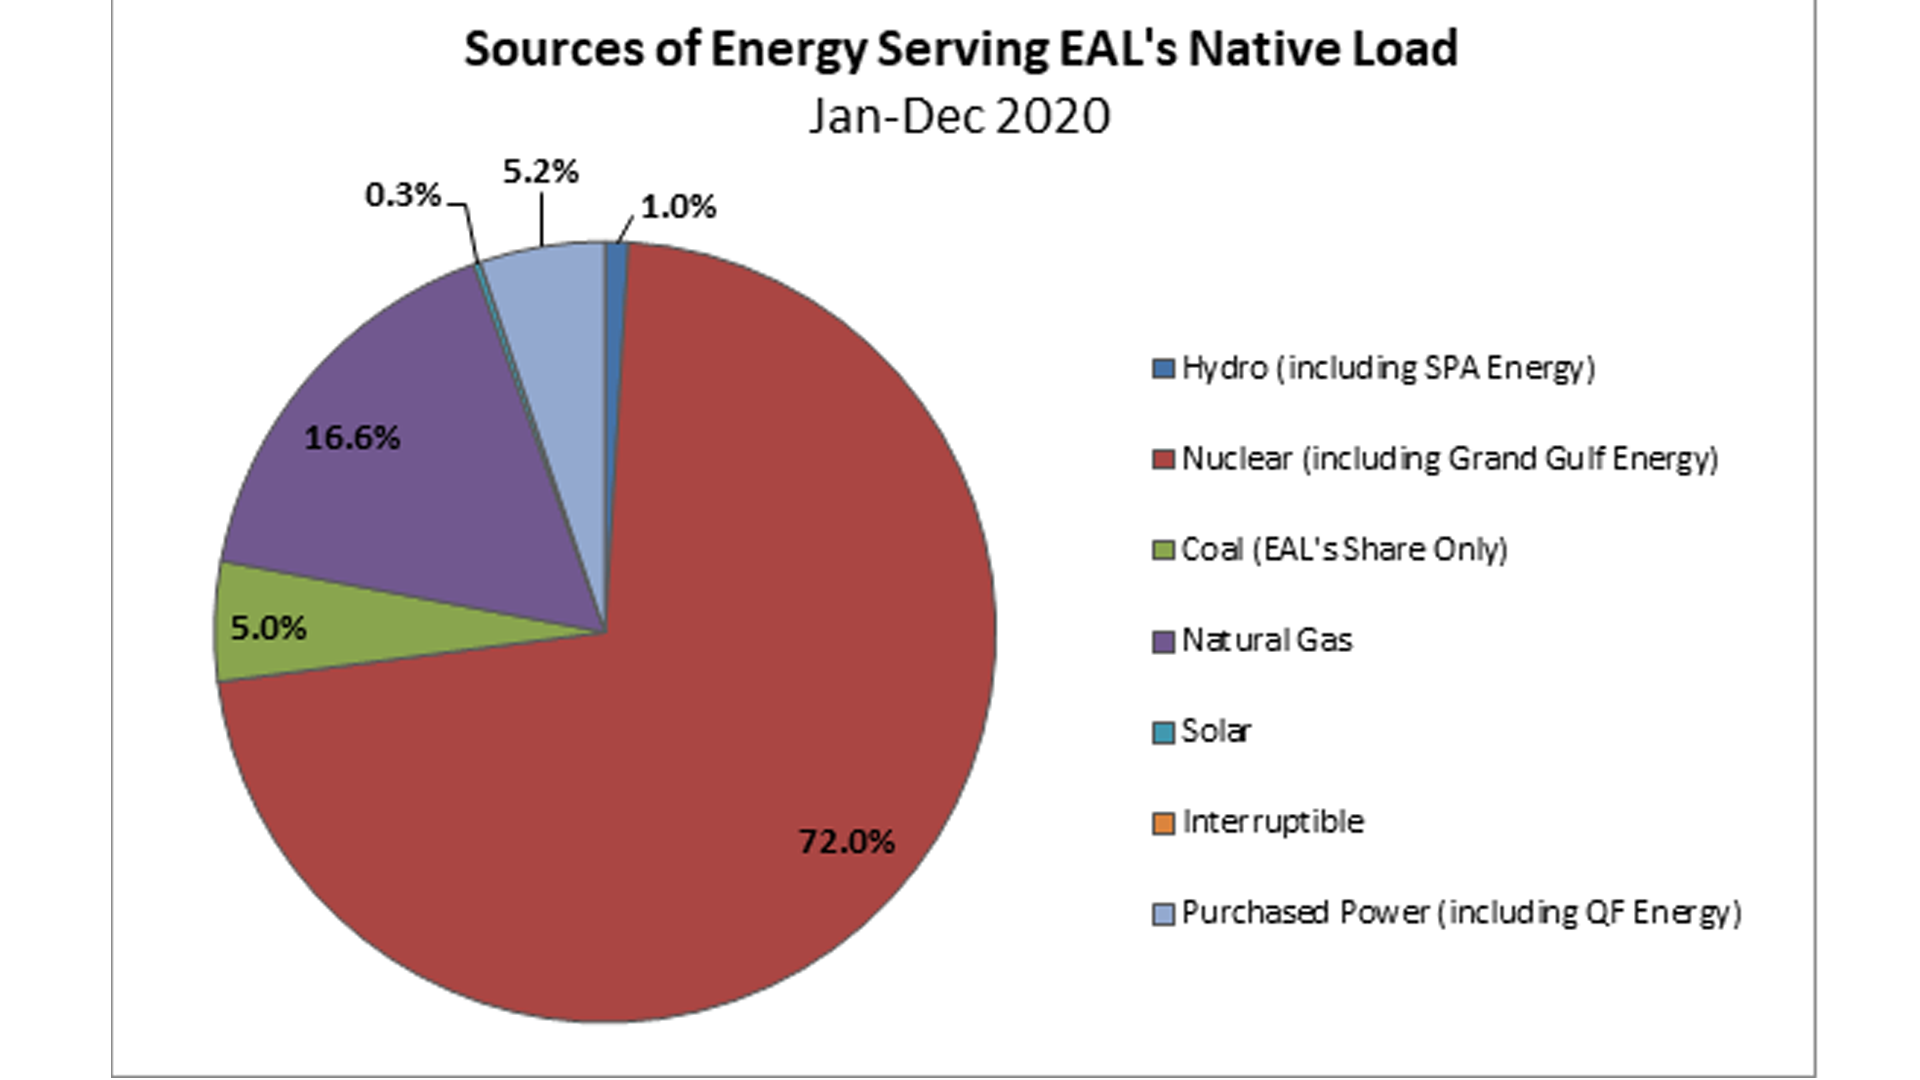 Virtually emission-free nuclear power remains Entergy Arkansas' largest source of power, by far. 